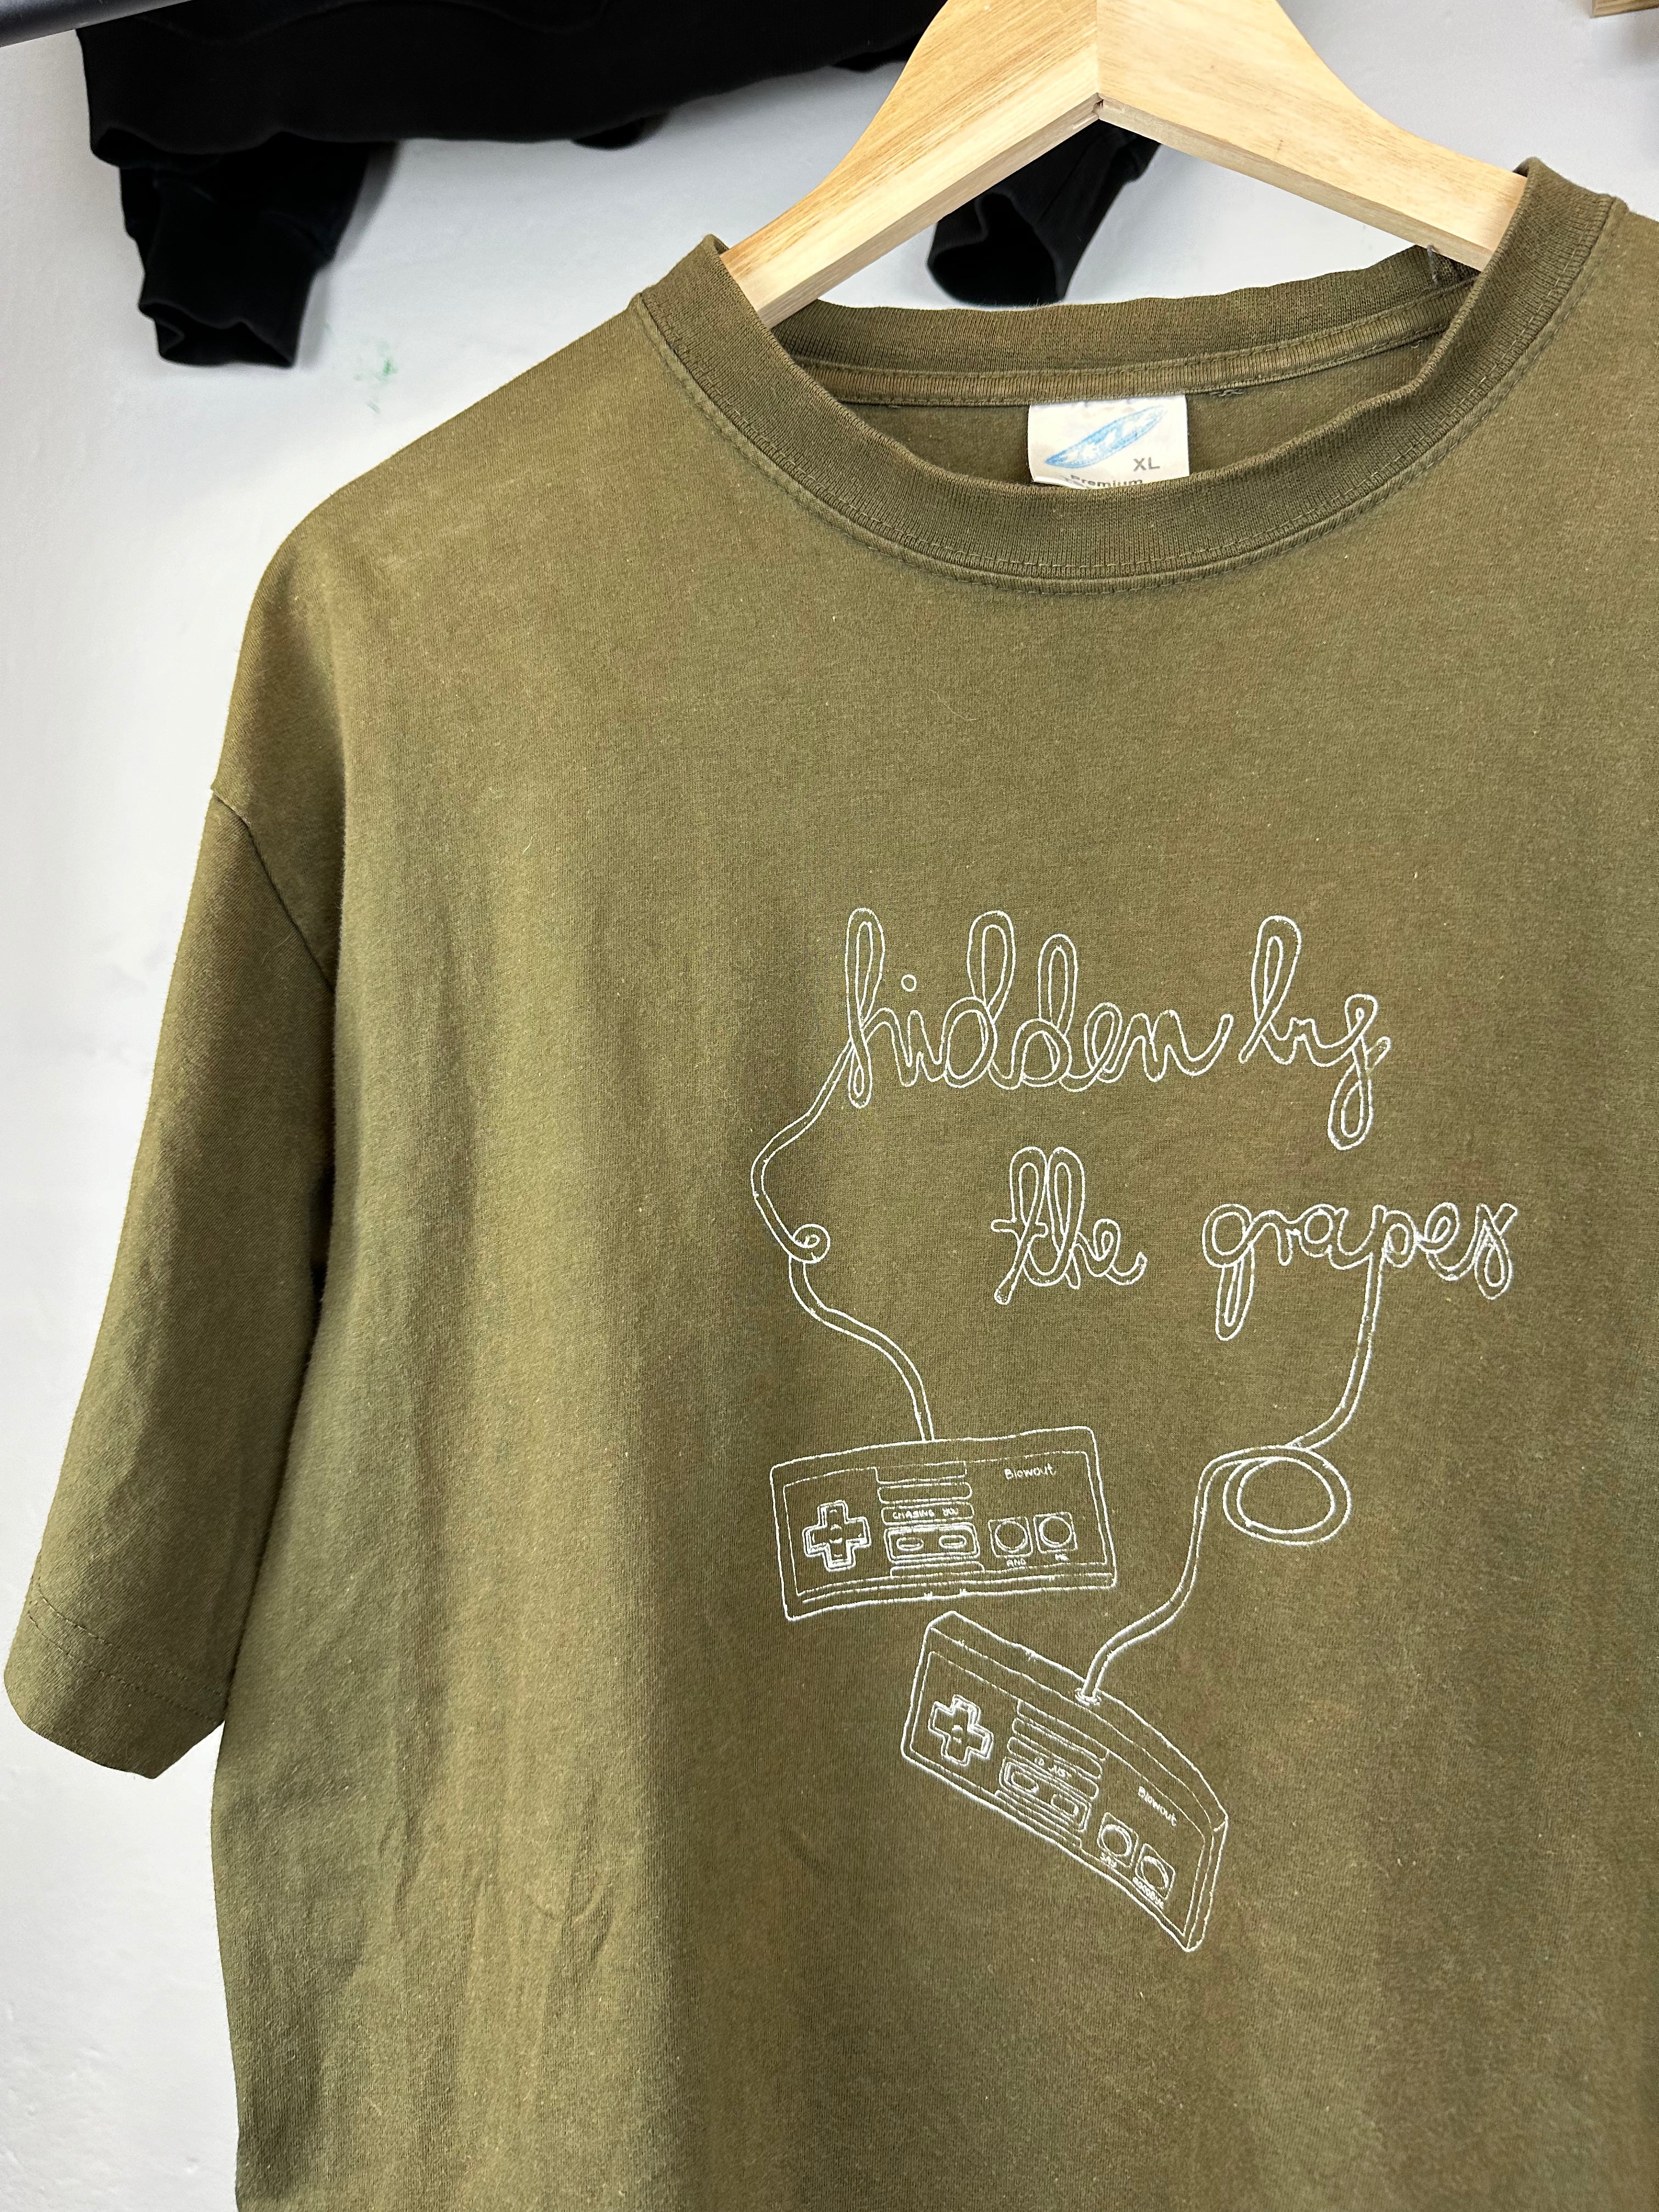 Vintage Hidden by the Grapes 90s T-shirt - size XL